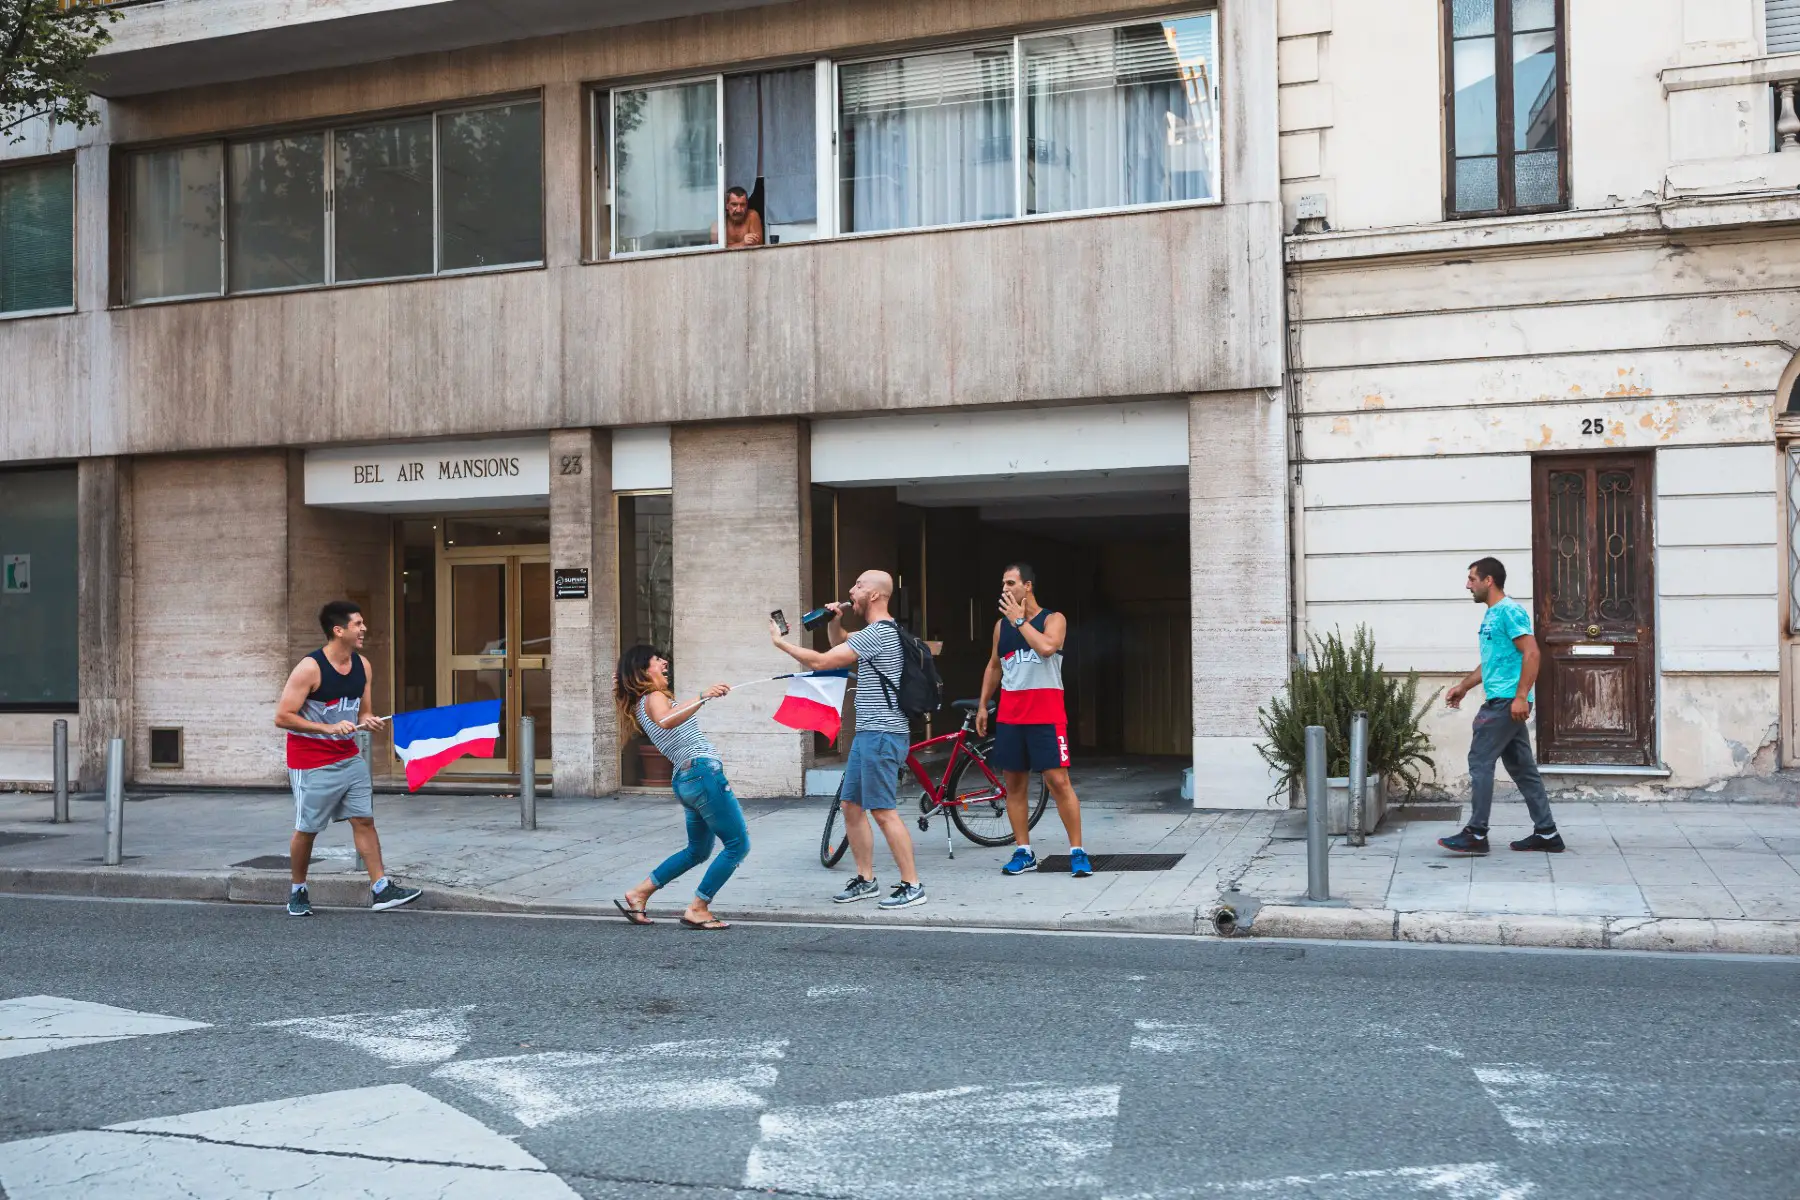 People waving French flags and celebrating on the sidewalk outside an apartment building. 